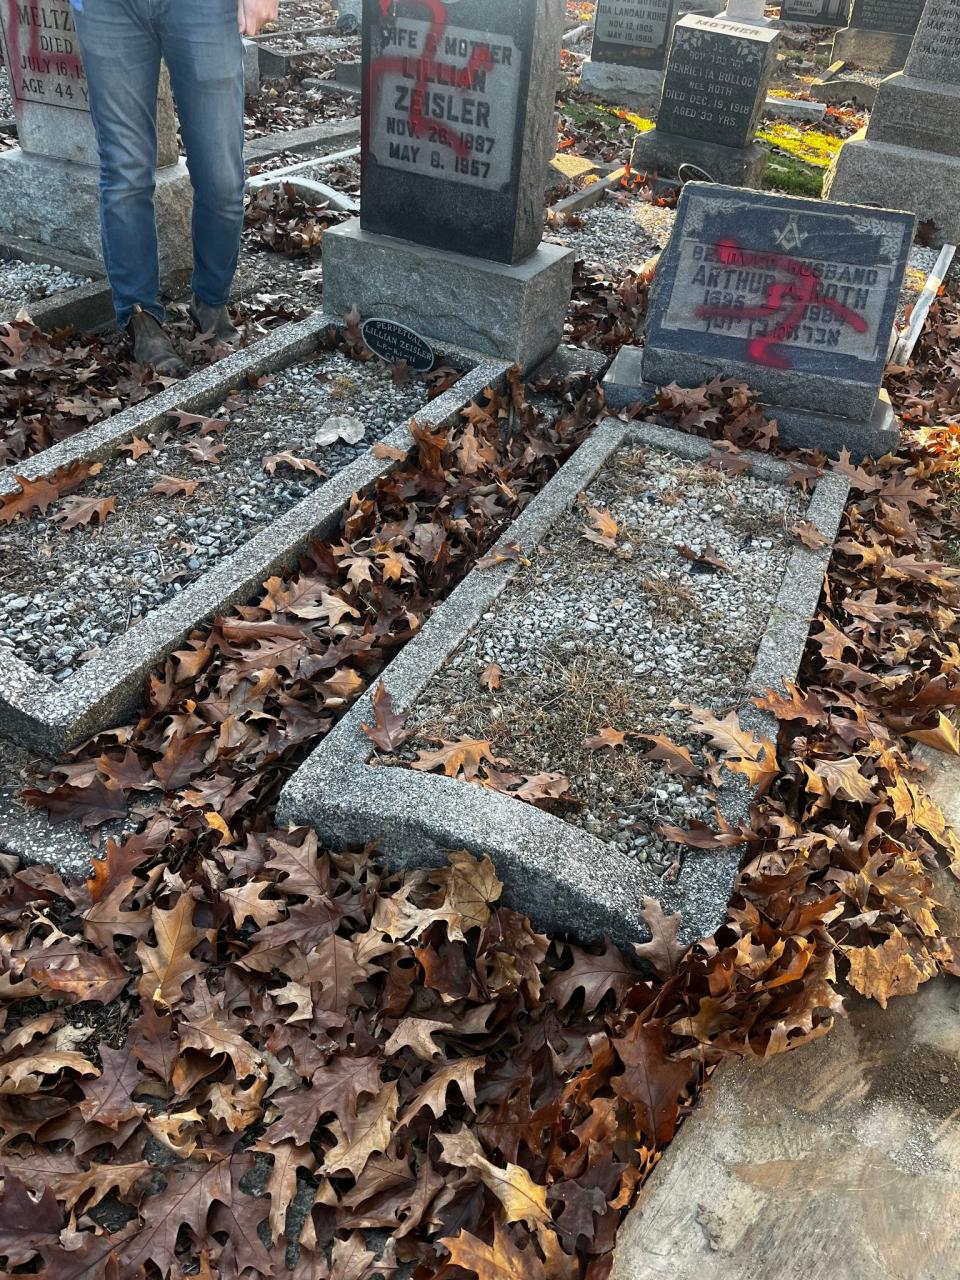 Volunteers removed graffiti that included swastikas at a Jewish Cemetery in Brooklyn, near Cleveland, on Sunday.